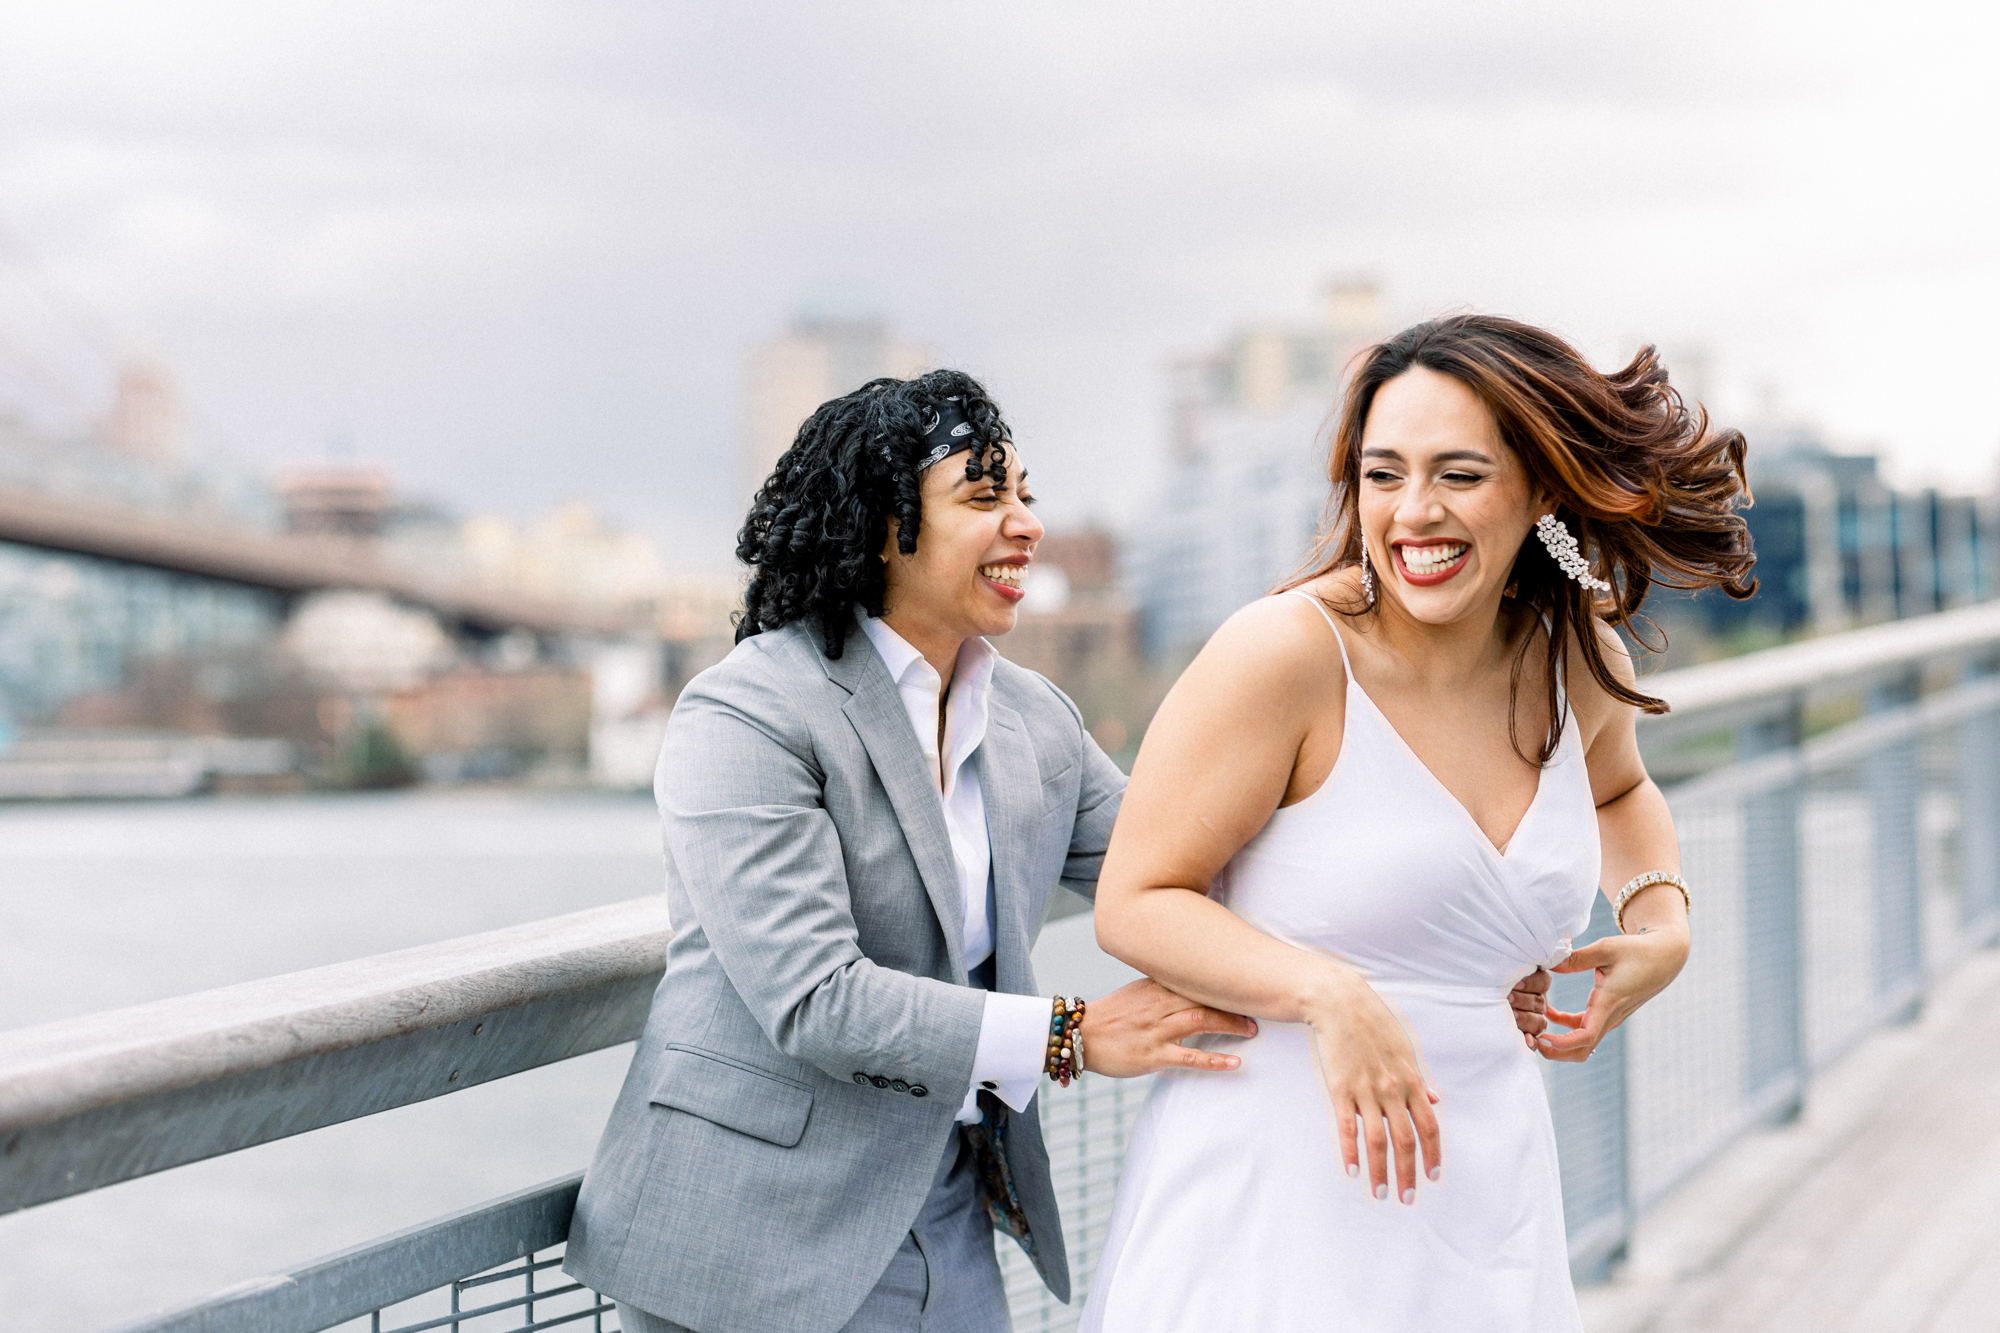 Fun South Street Seaport Engagement Photography